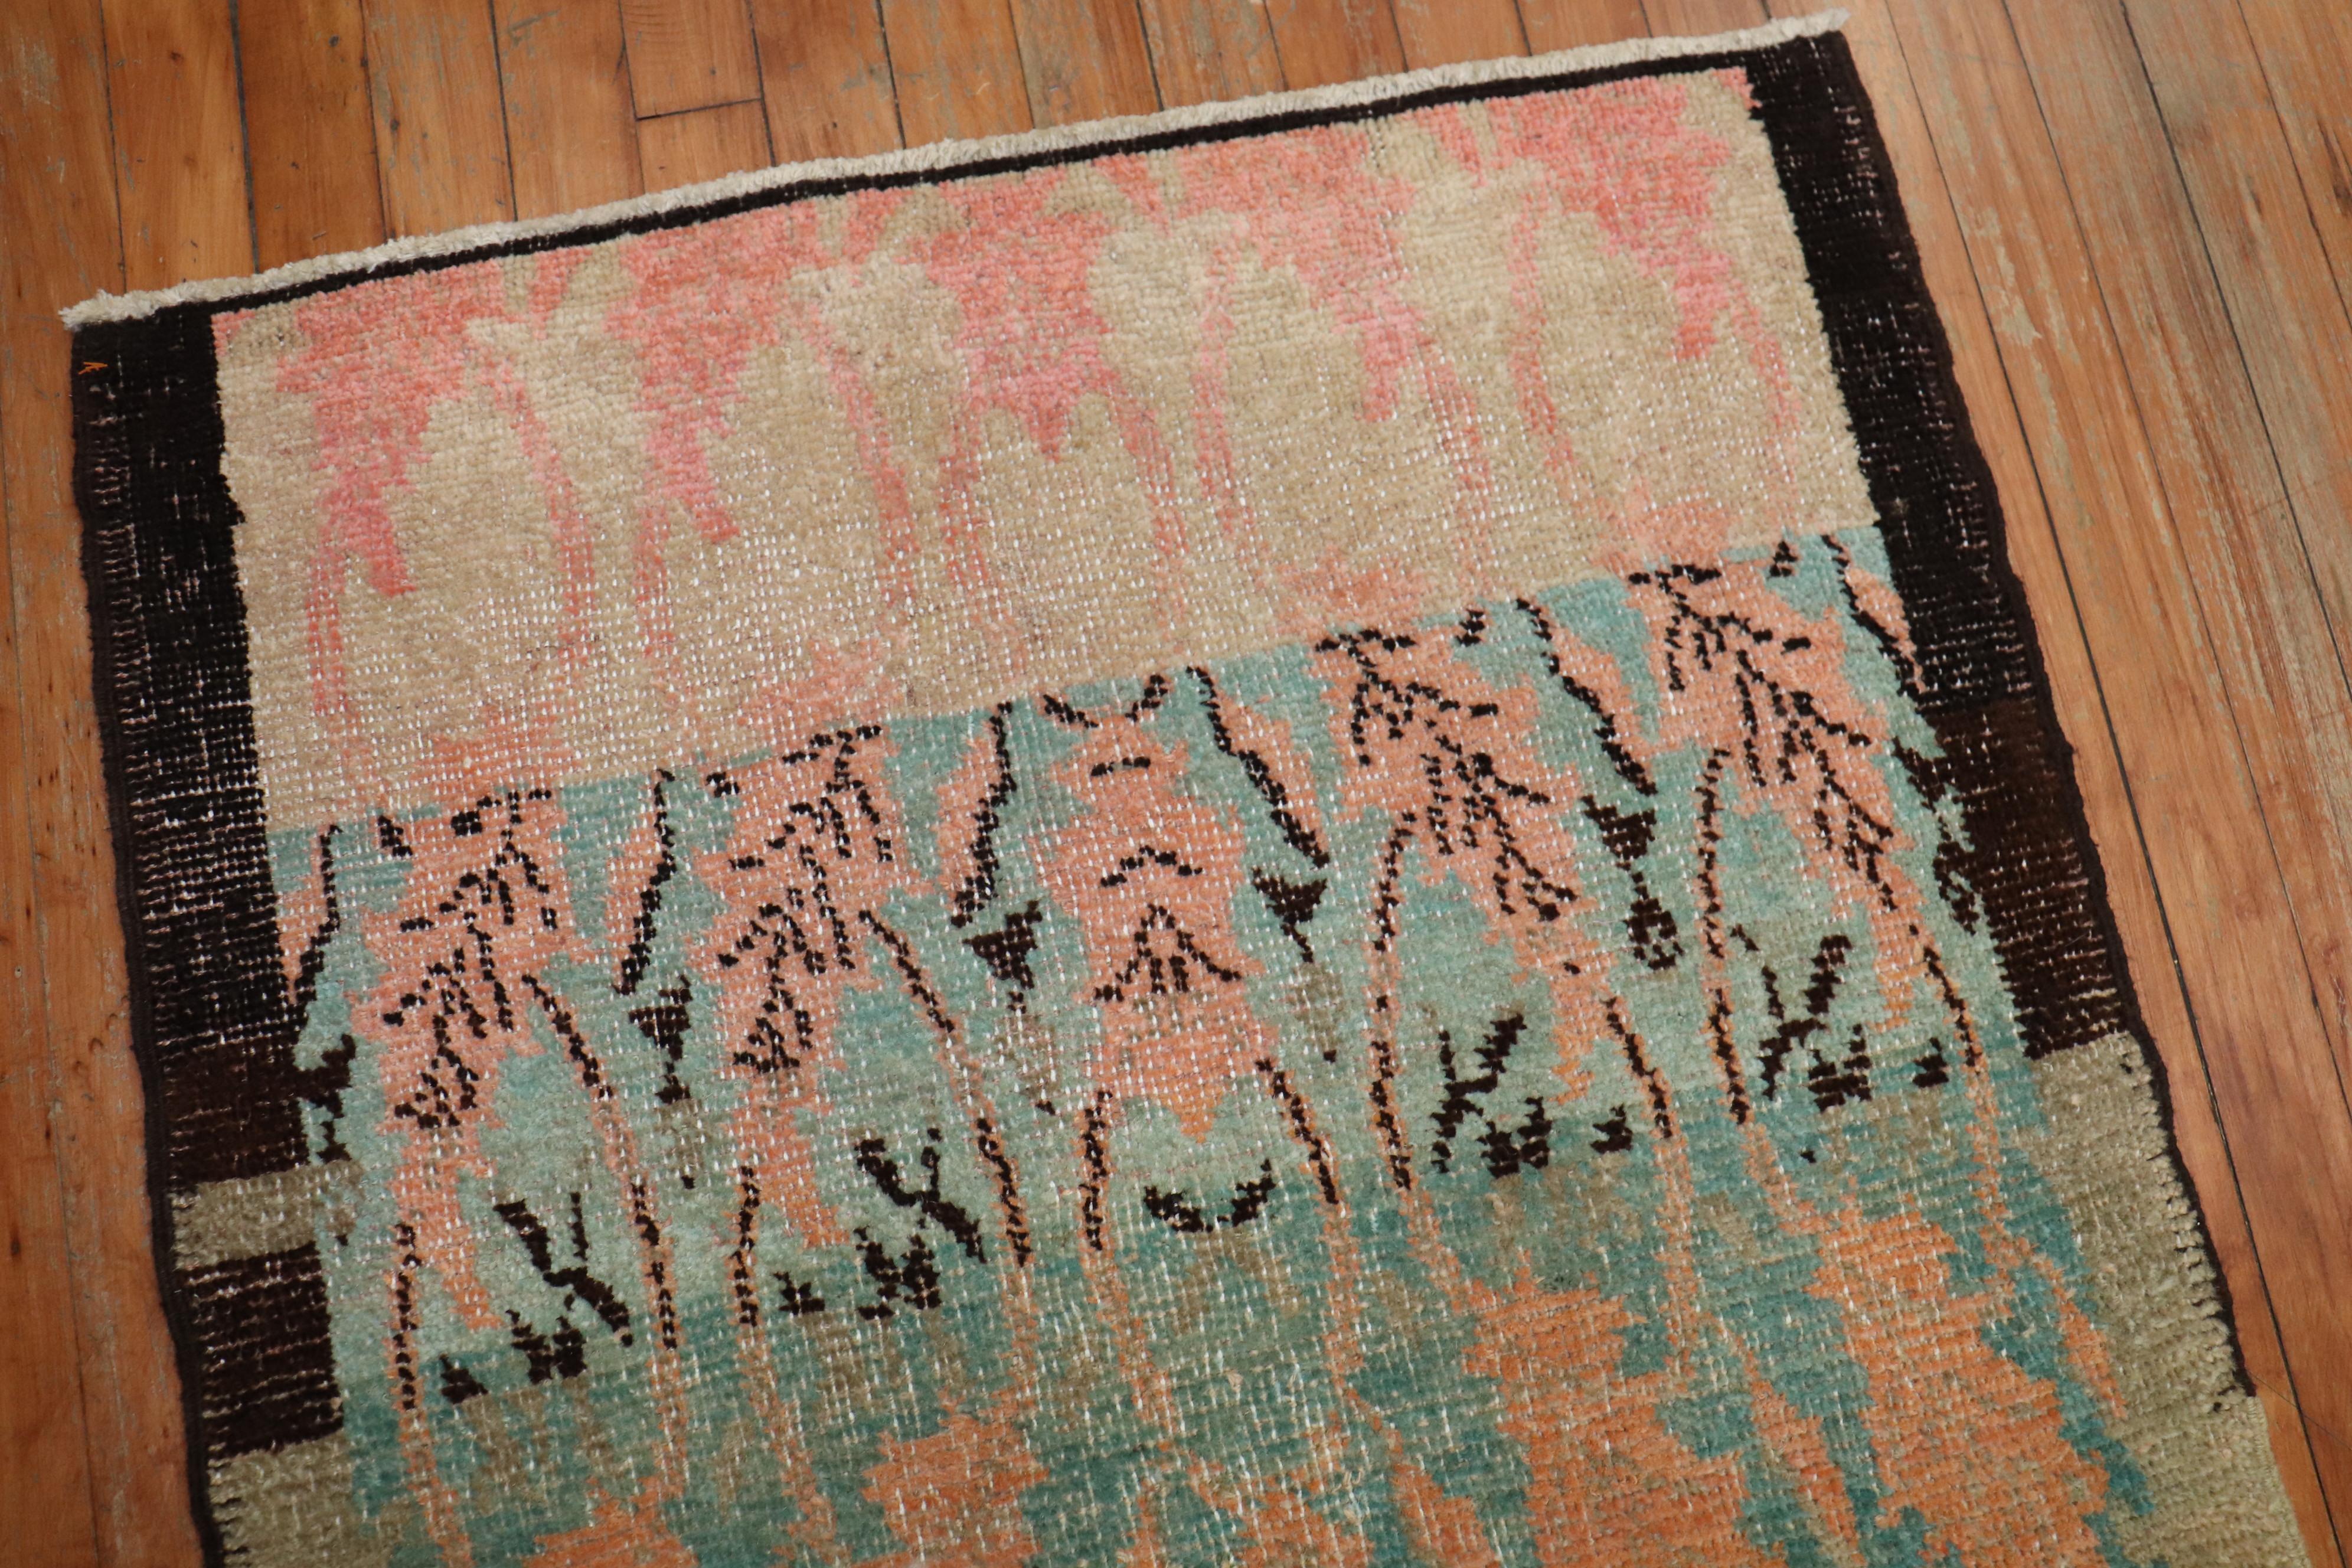 Hand-Woven Eclectic Turkish Throw Size Rug, Mid-20th Century